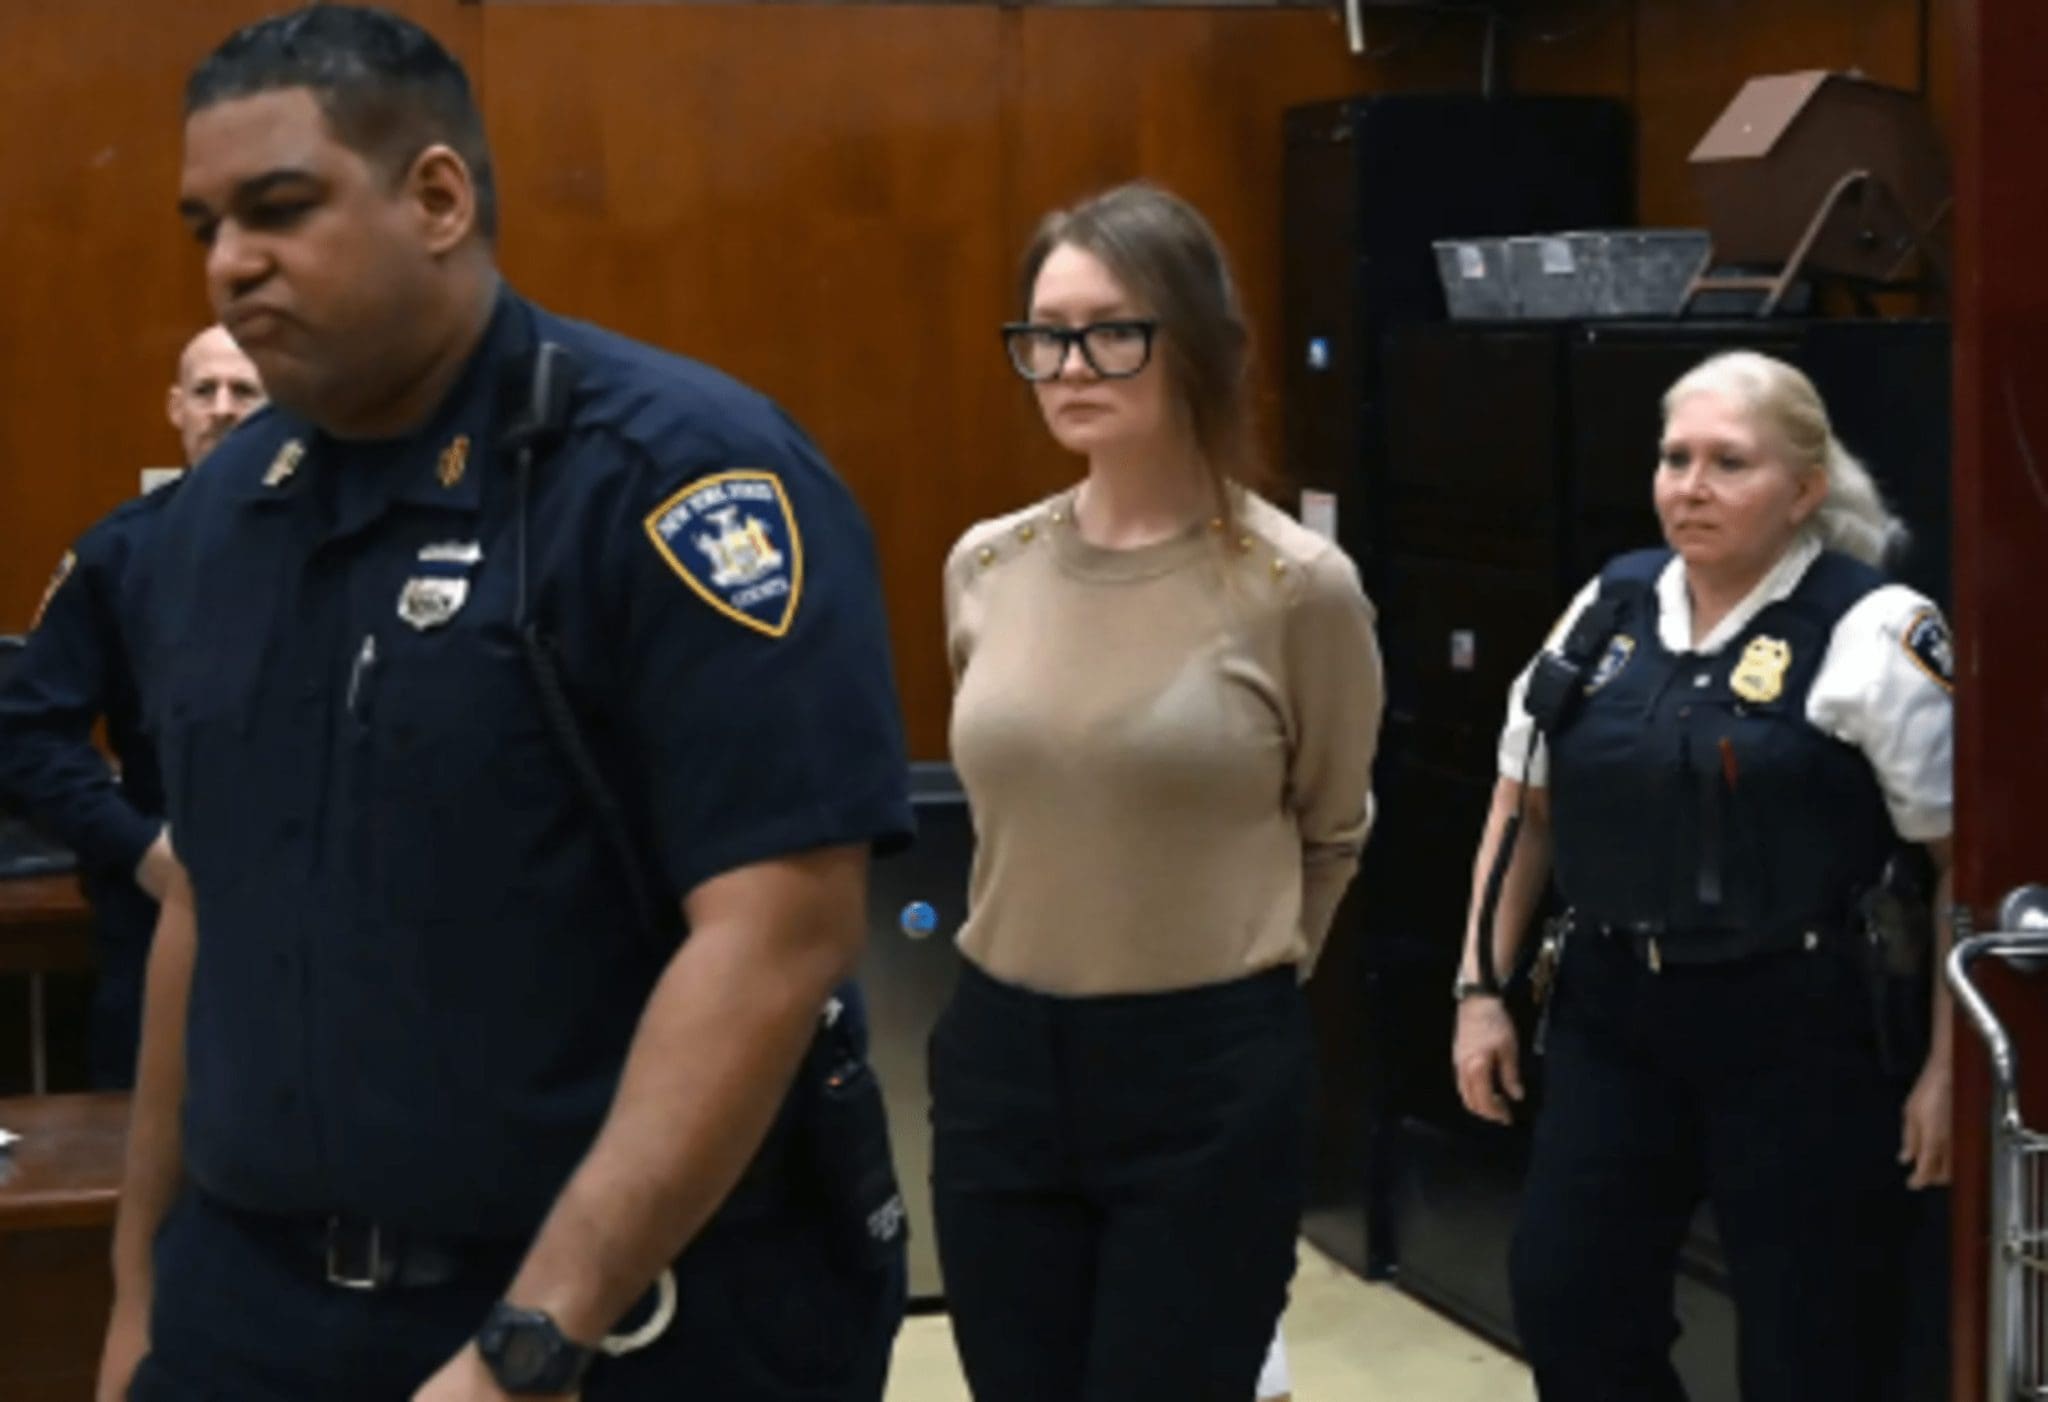 Convicted fraudster and socialite Anna Delvey (née Sorokin) may be released from an ICE prison center if she can secure accommodation.